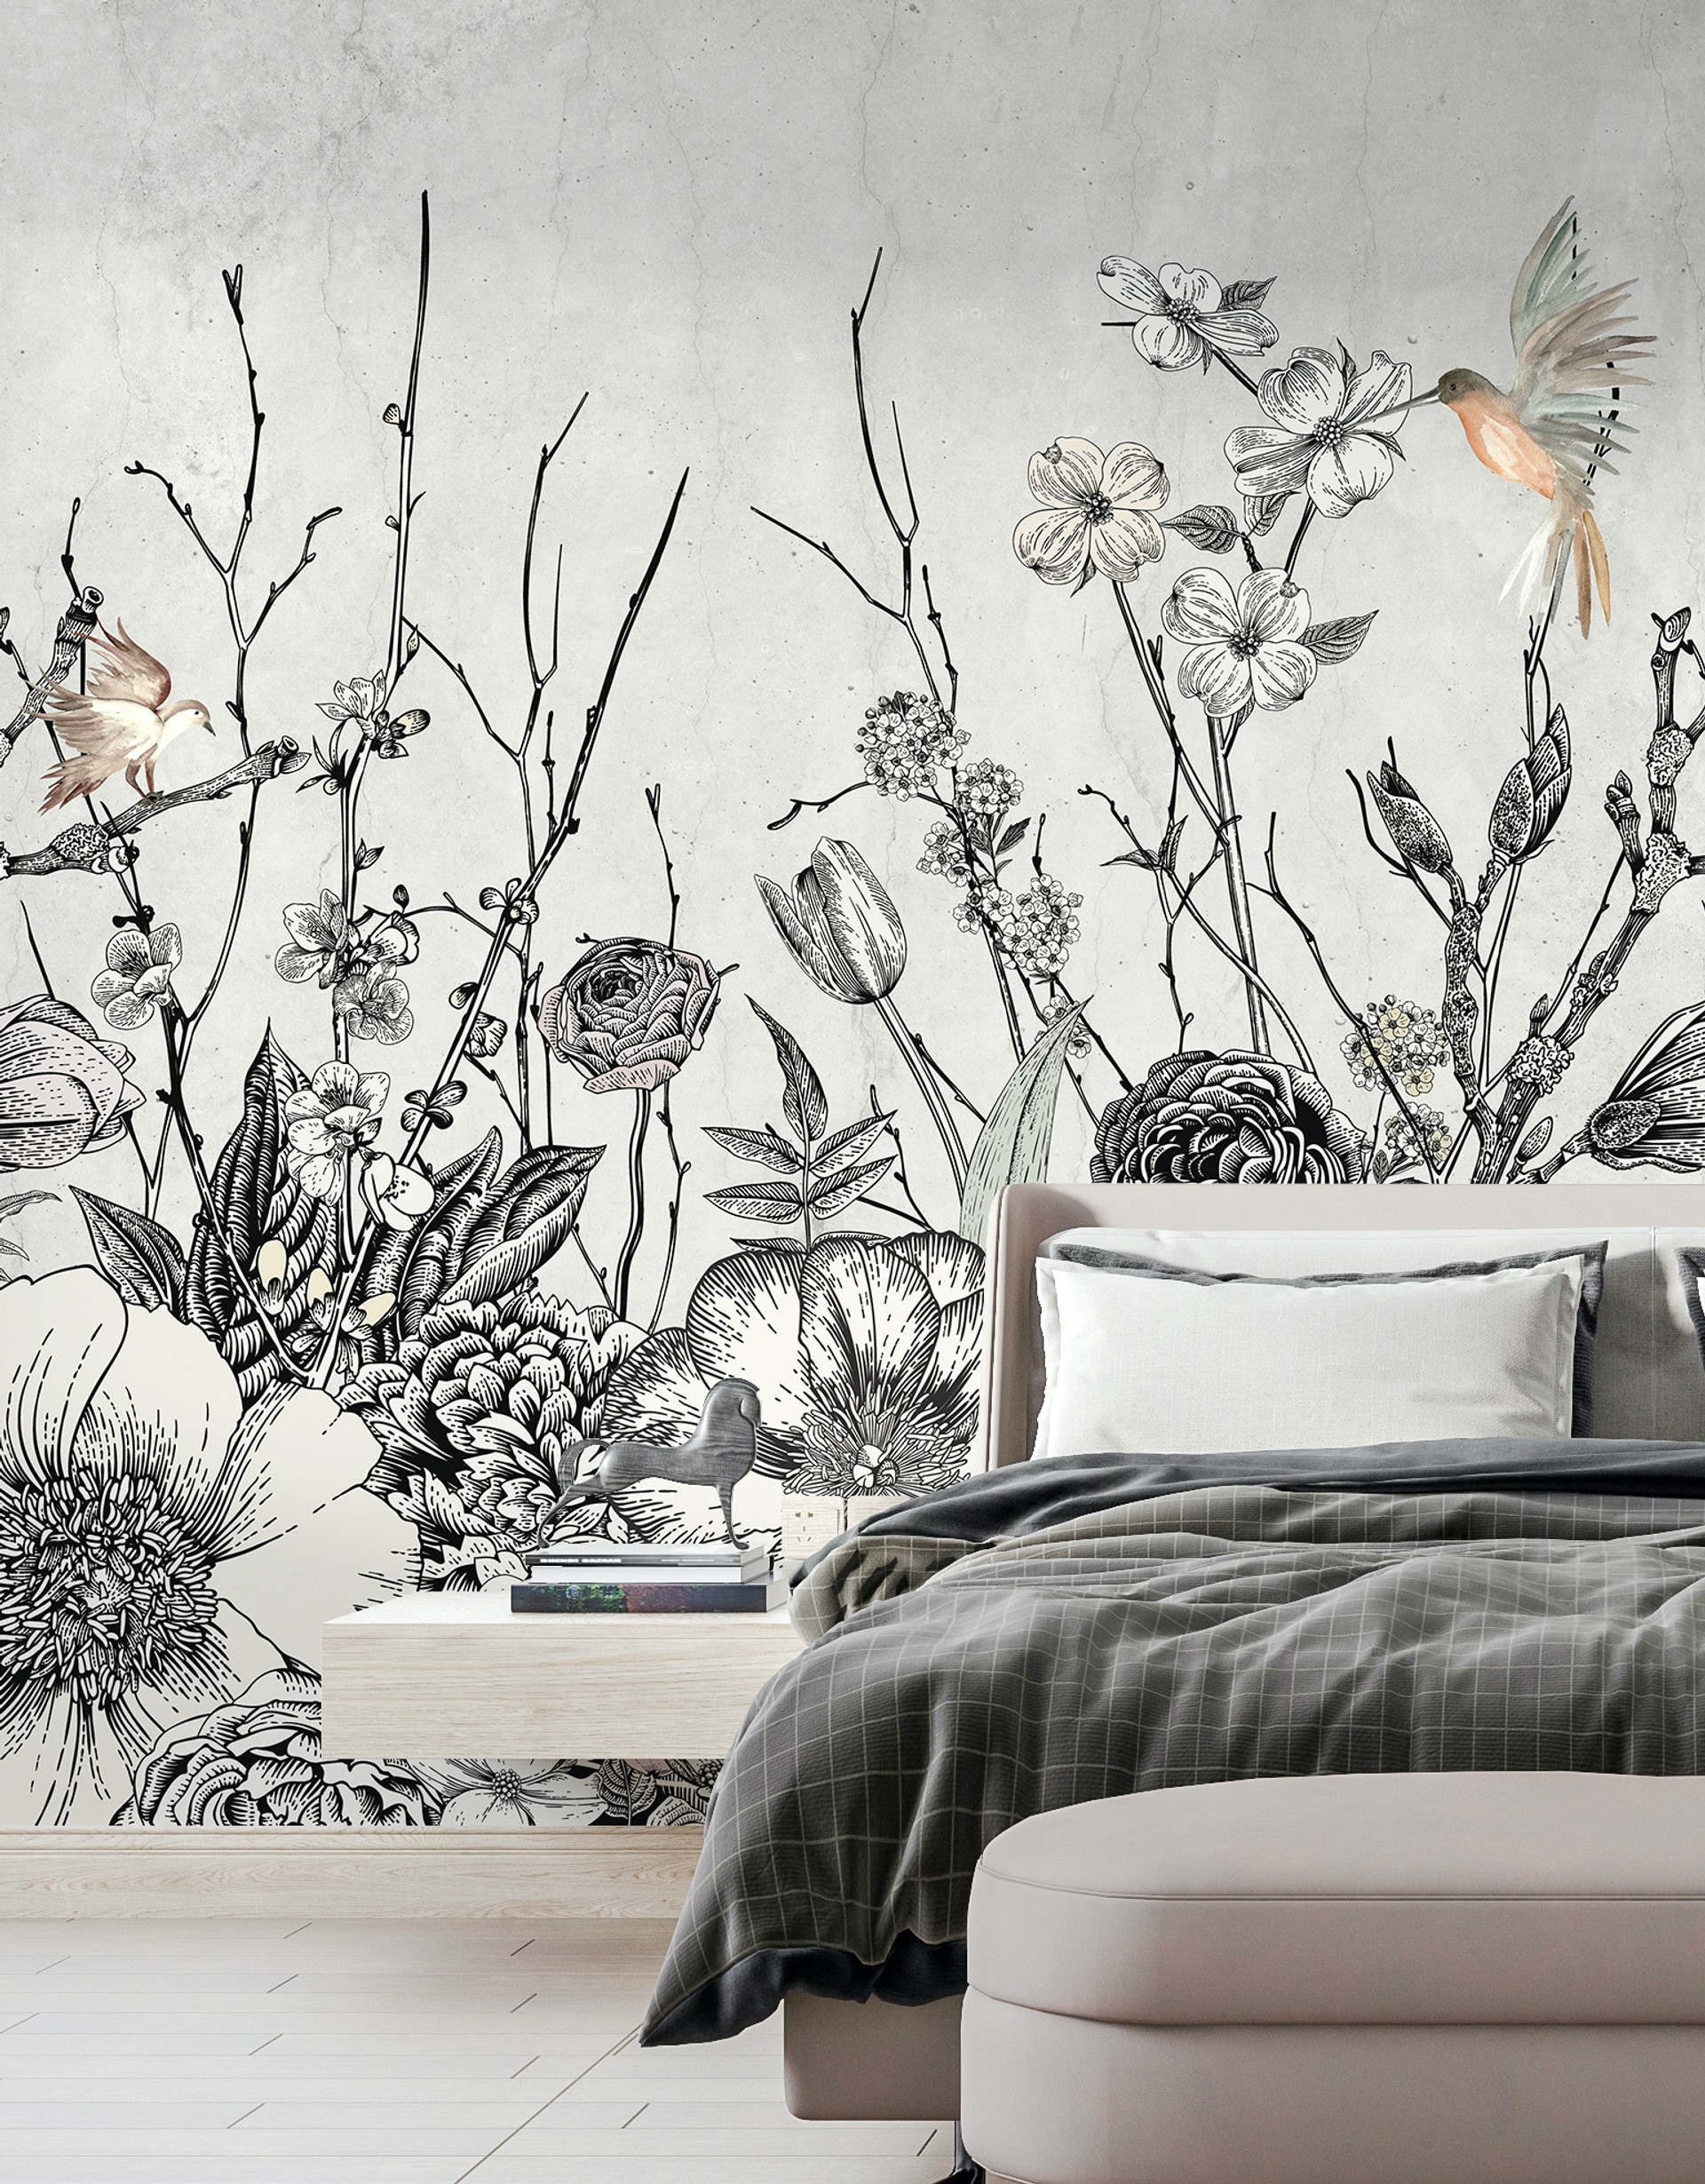 Black and White Wild Flowers and Birds Foliage Wallpaper Mural